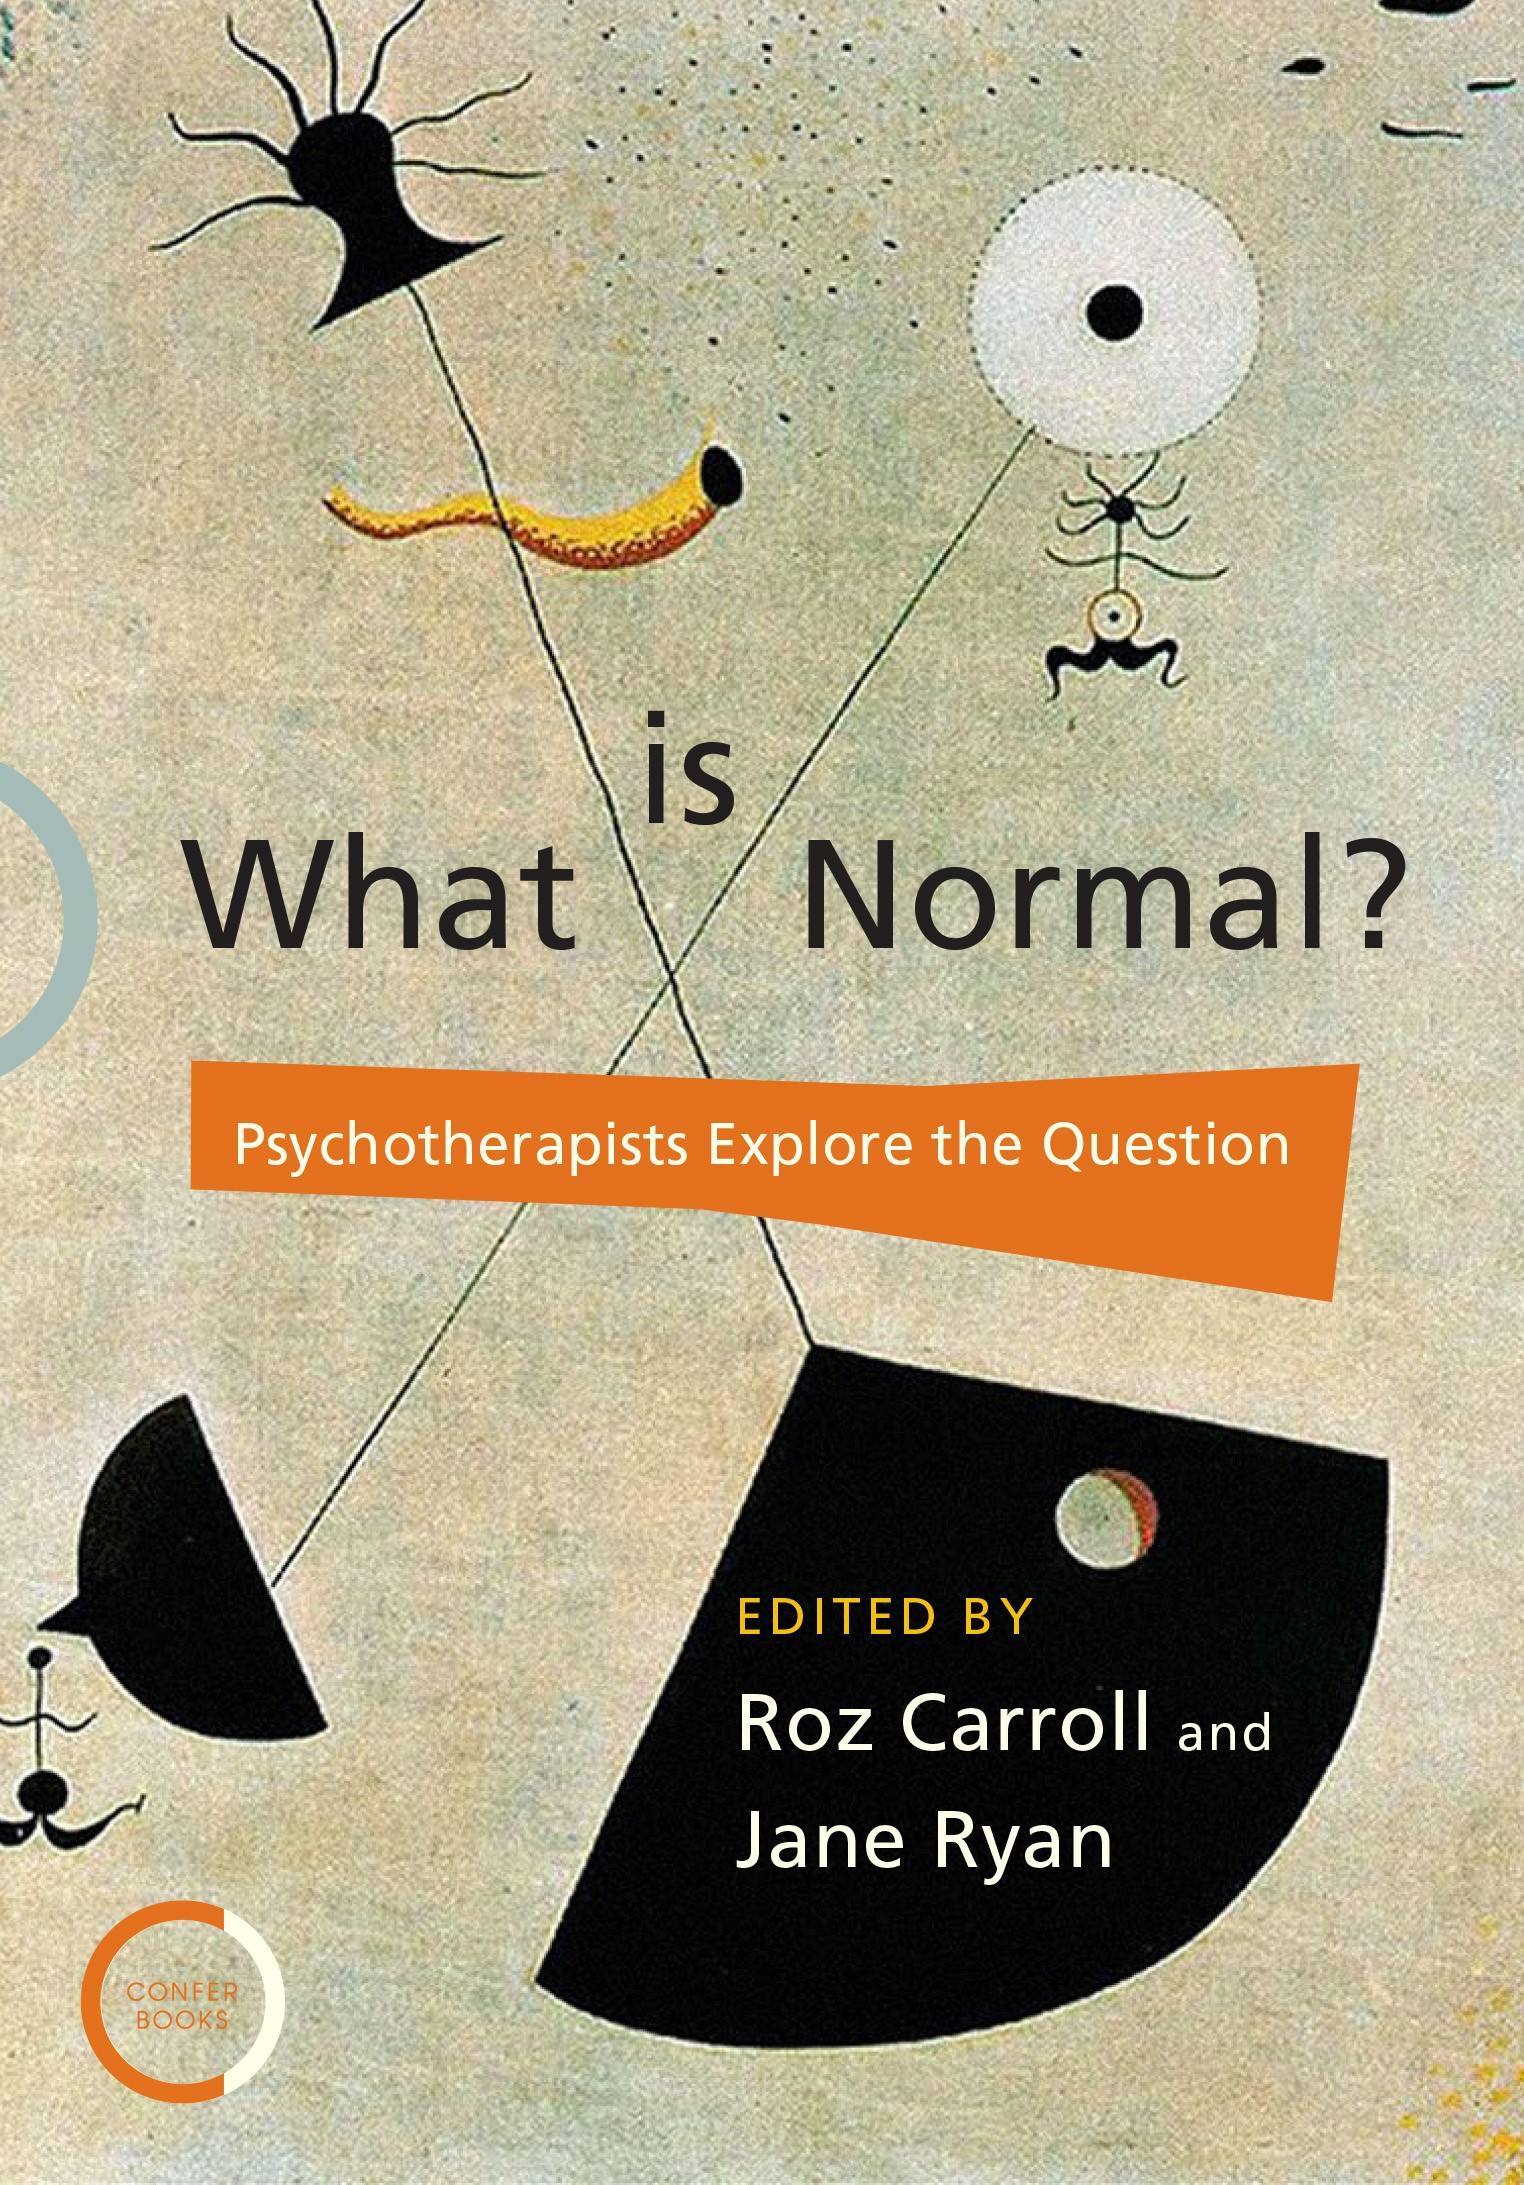 What is Normal?: Psychotherapists Explore the Question